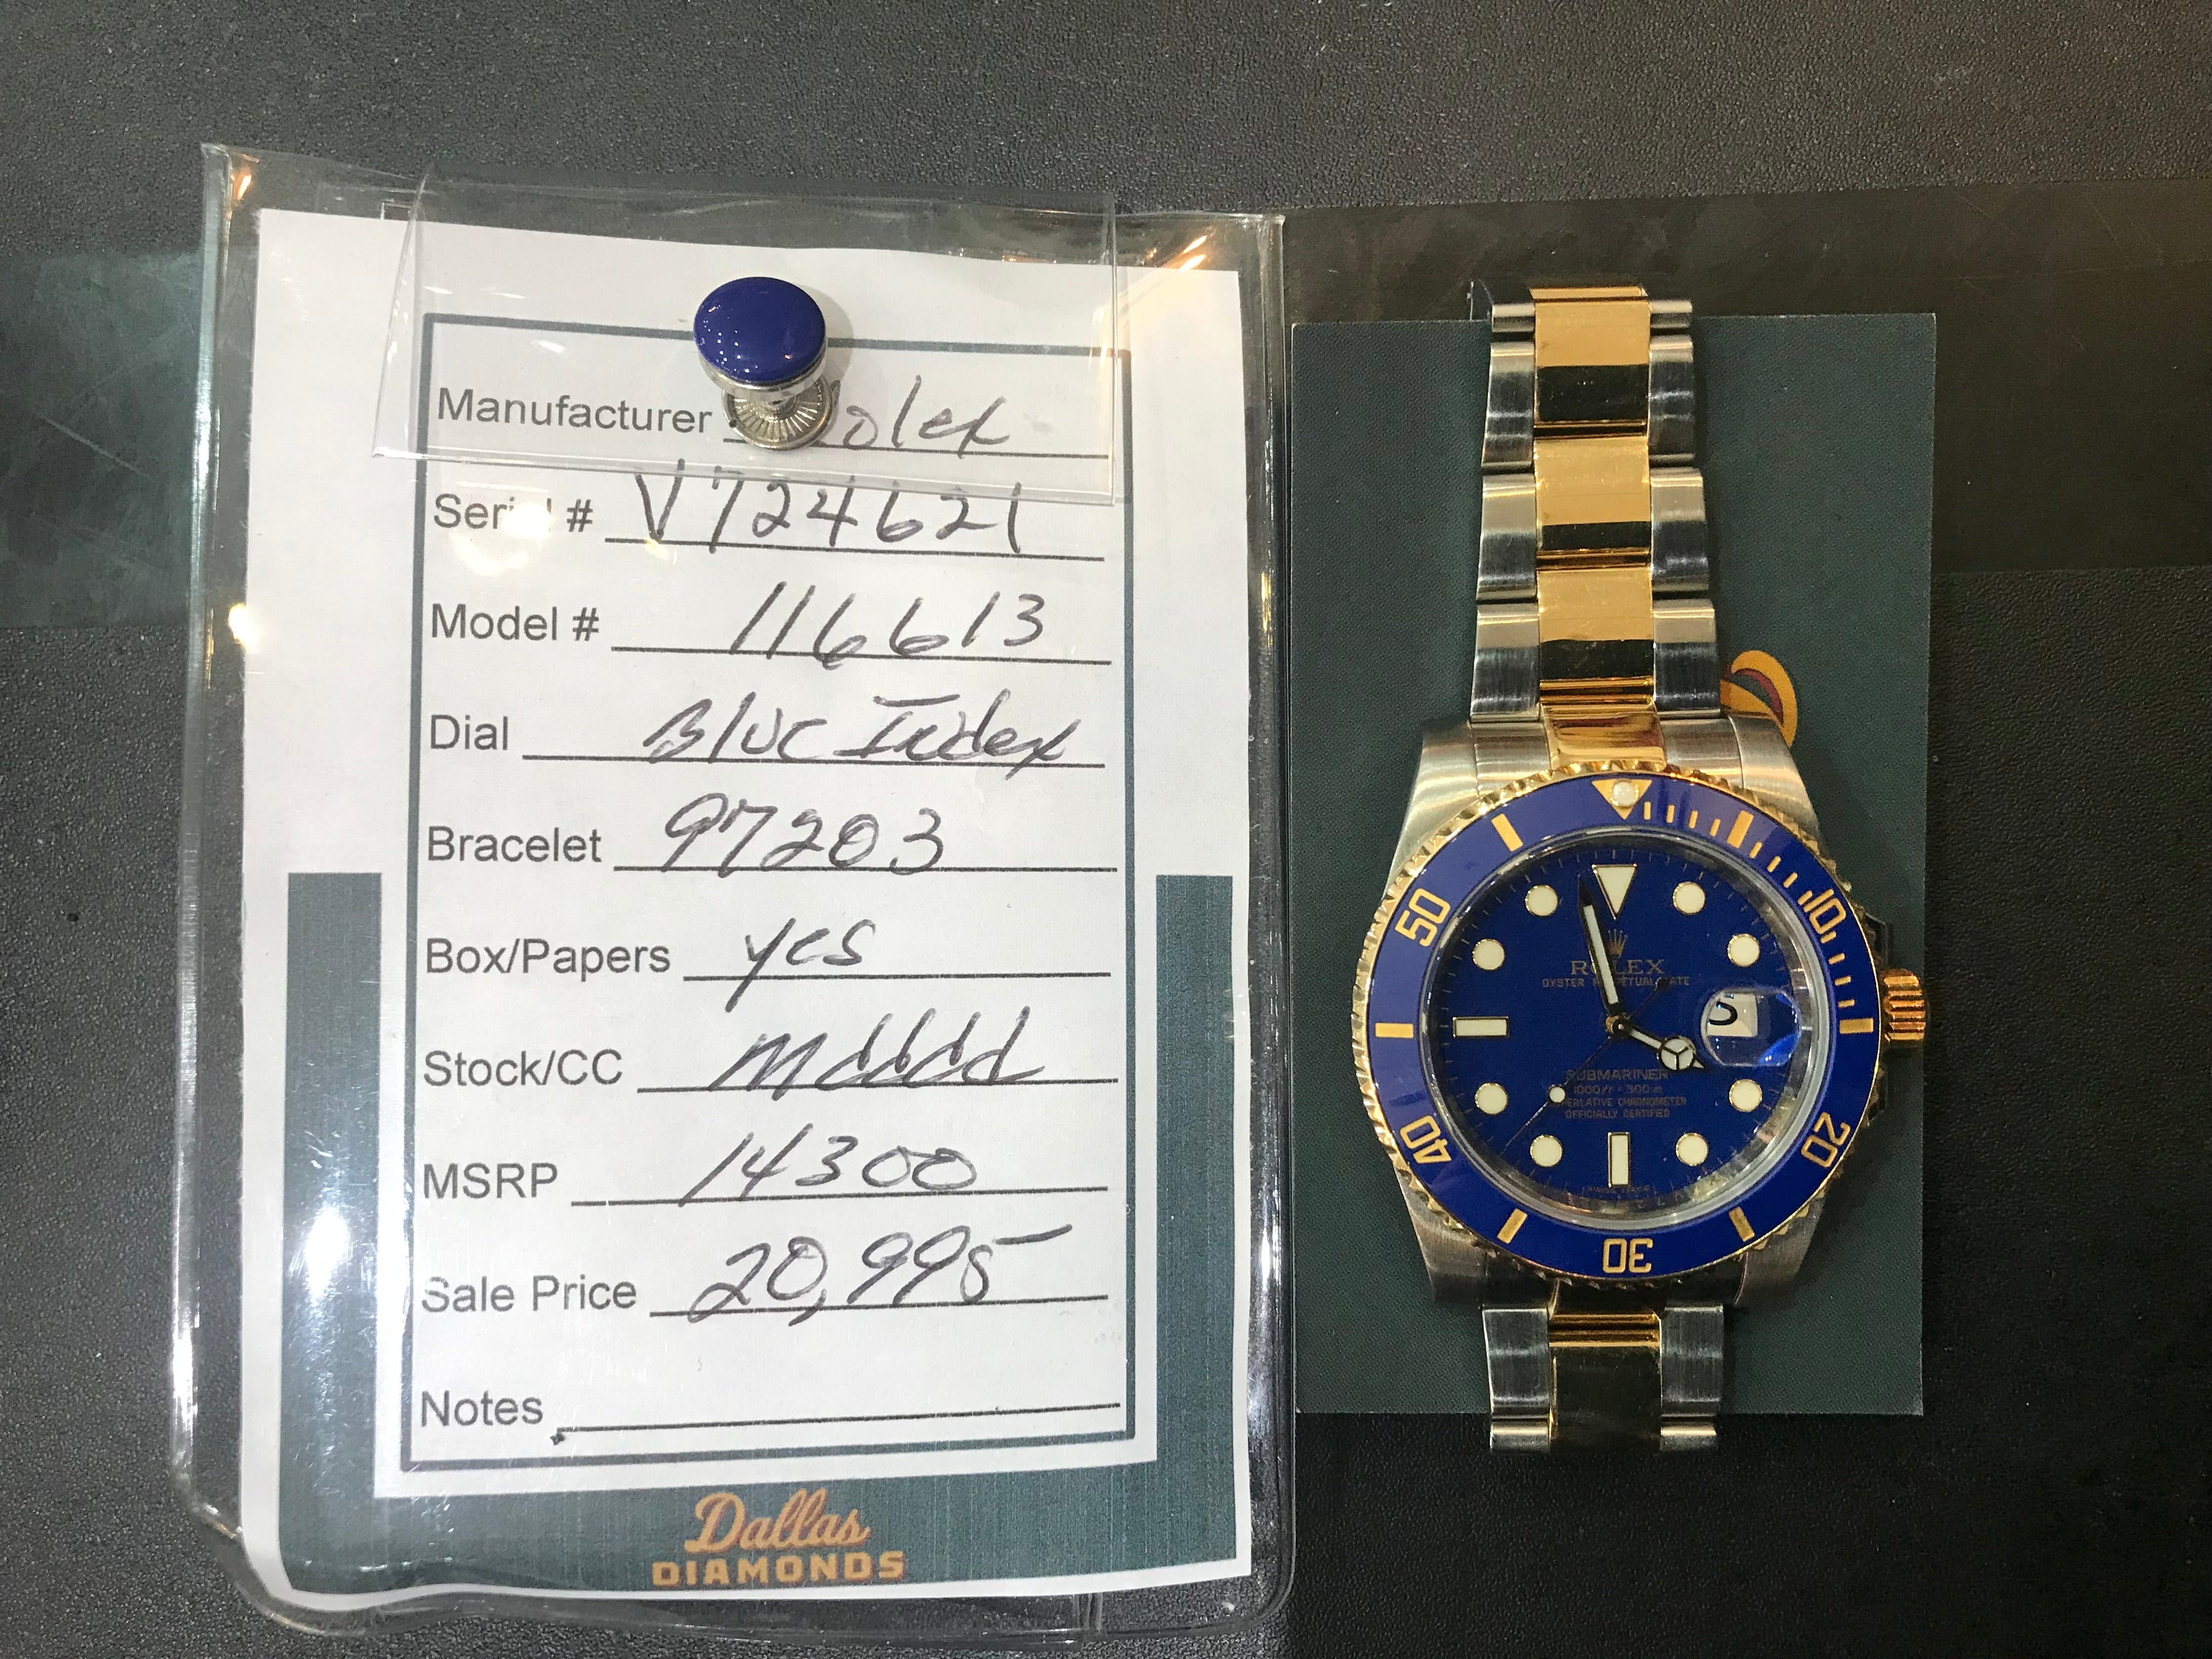 Rolex Submariner 116613 40mm Green Dial Two-tone Watch